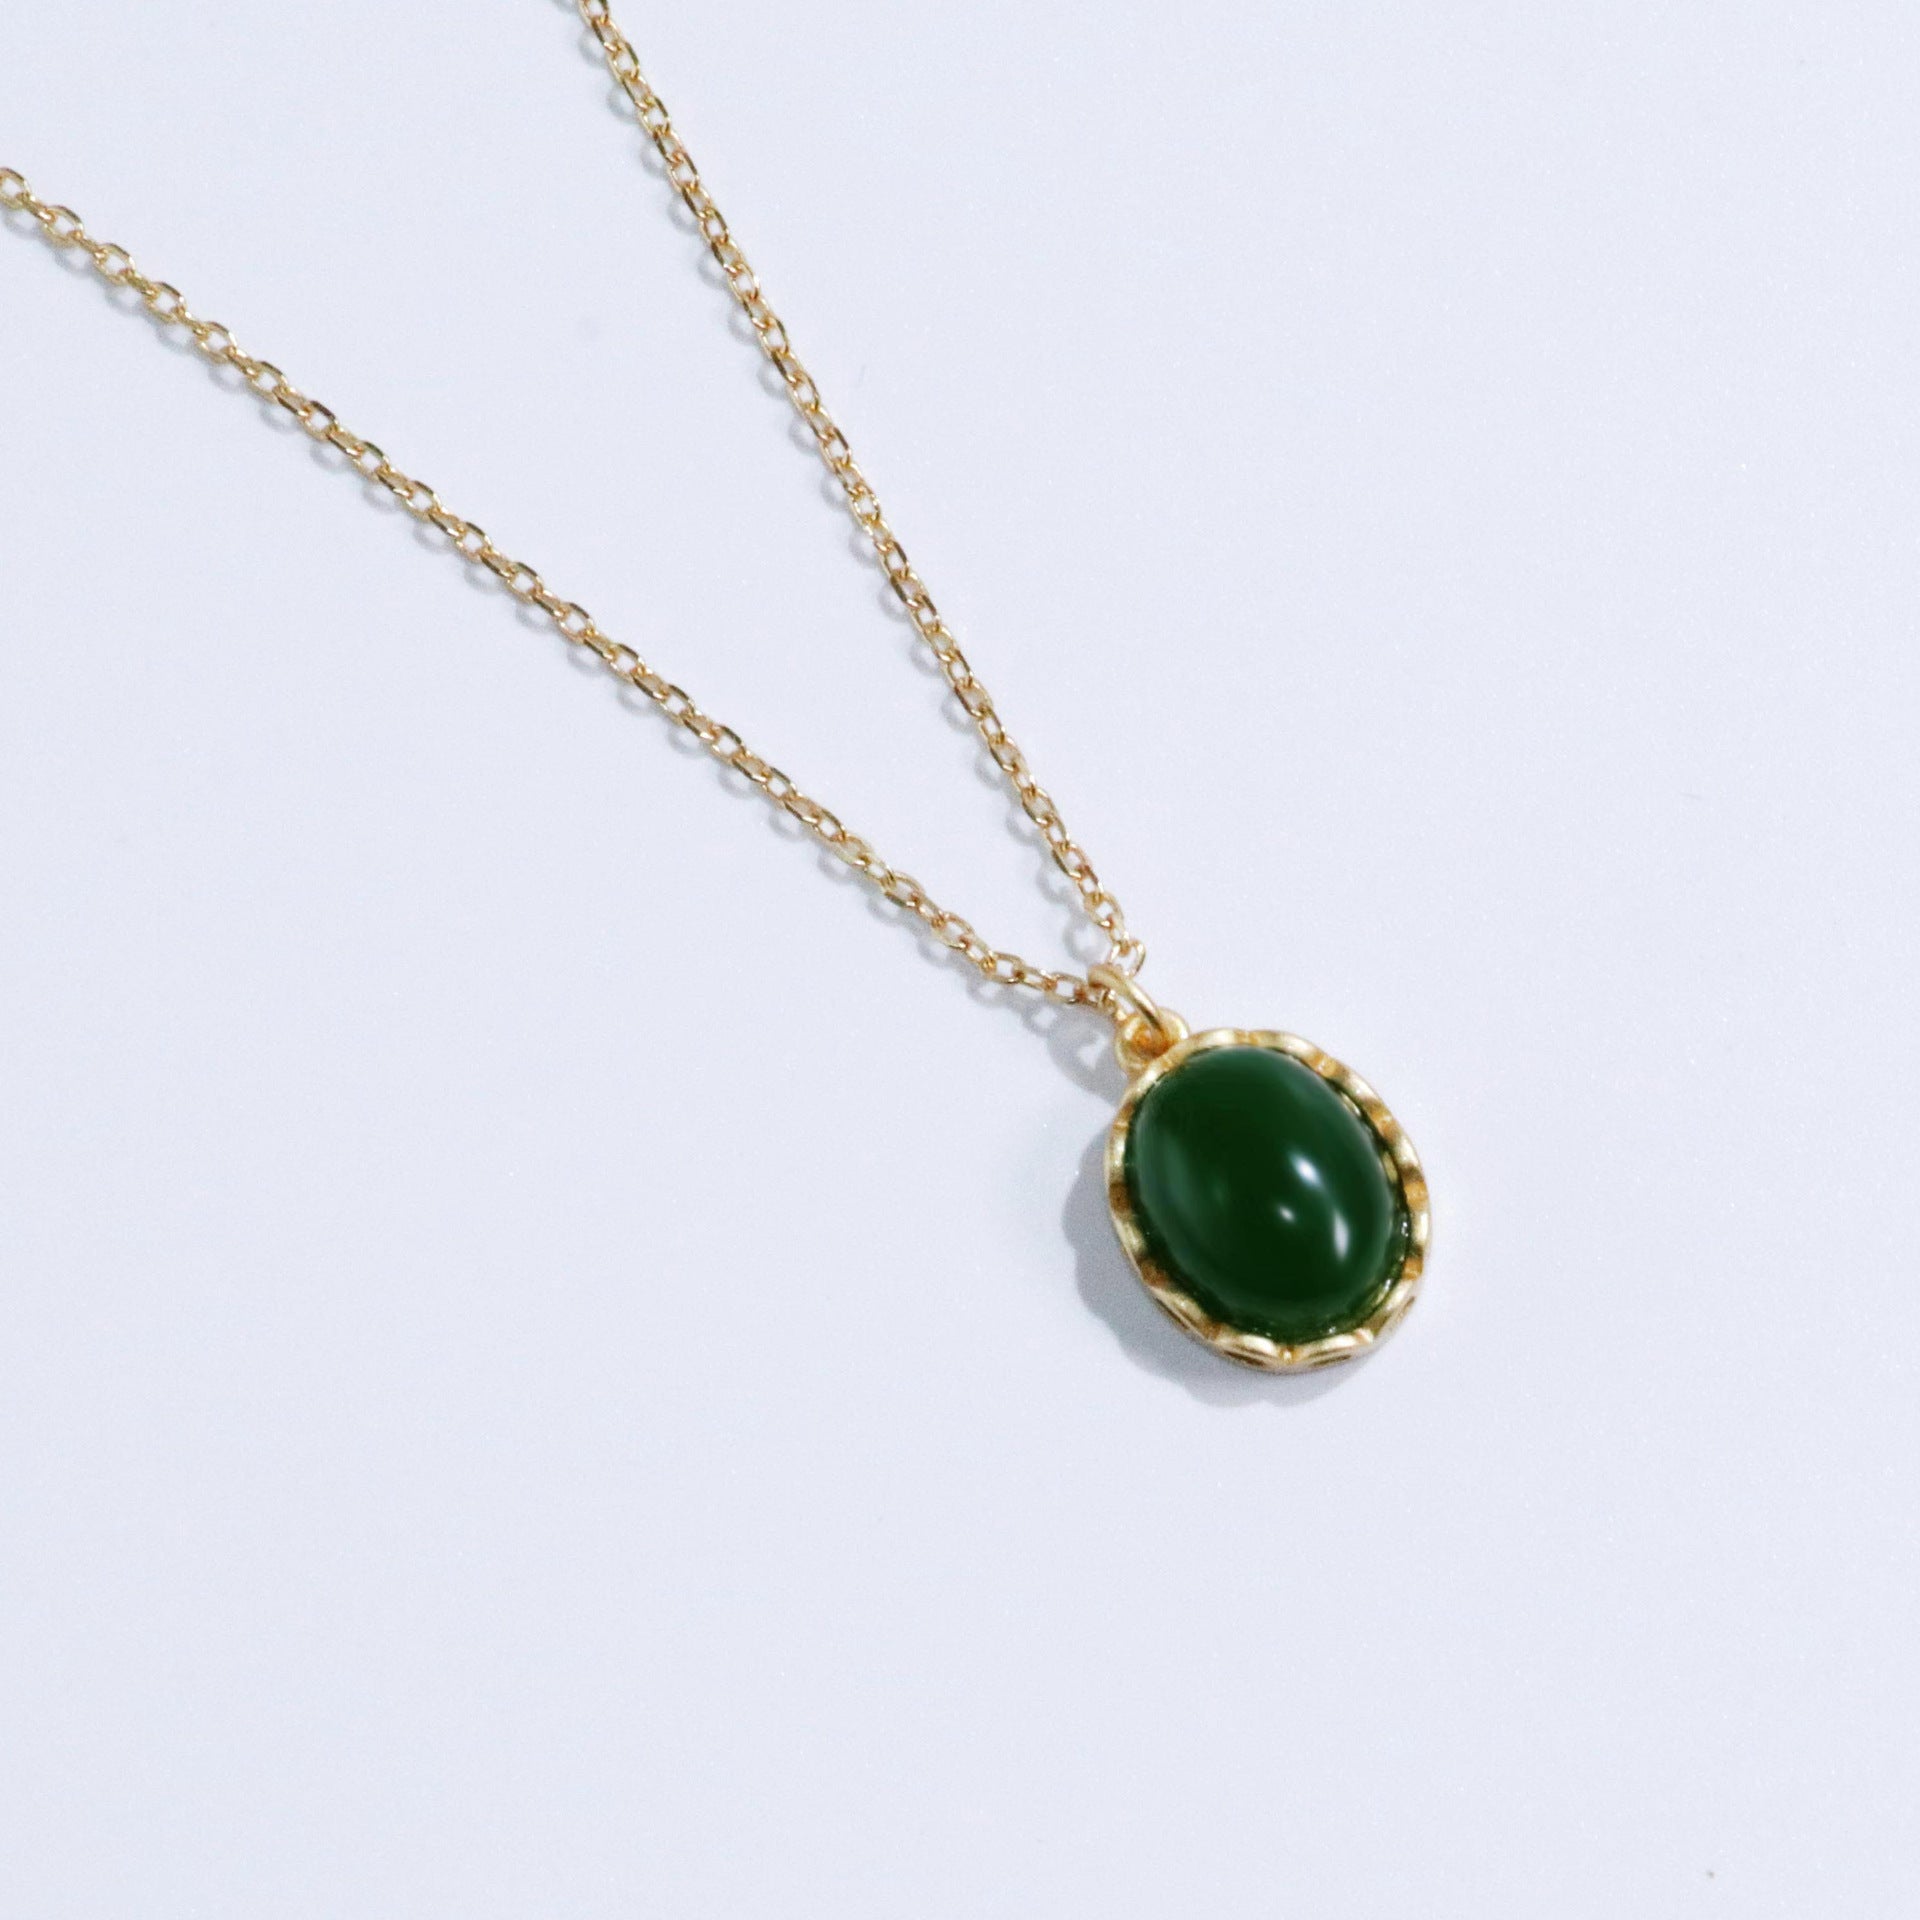 【Agate】Ellipse Round Green Agate Necklace